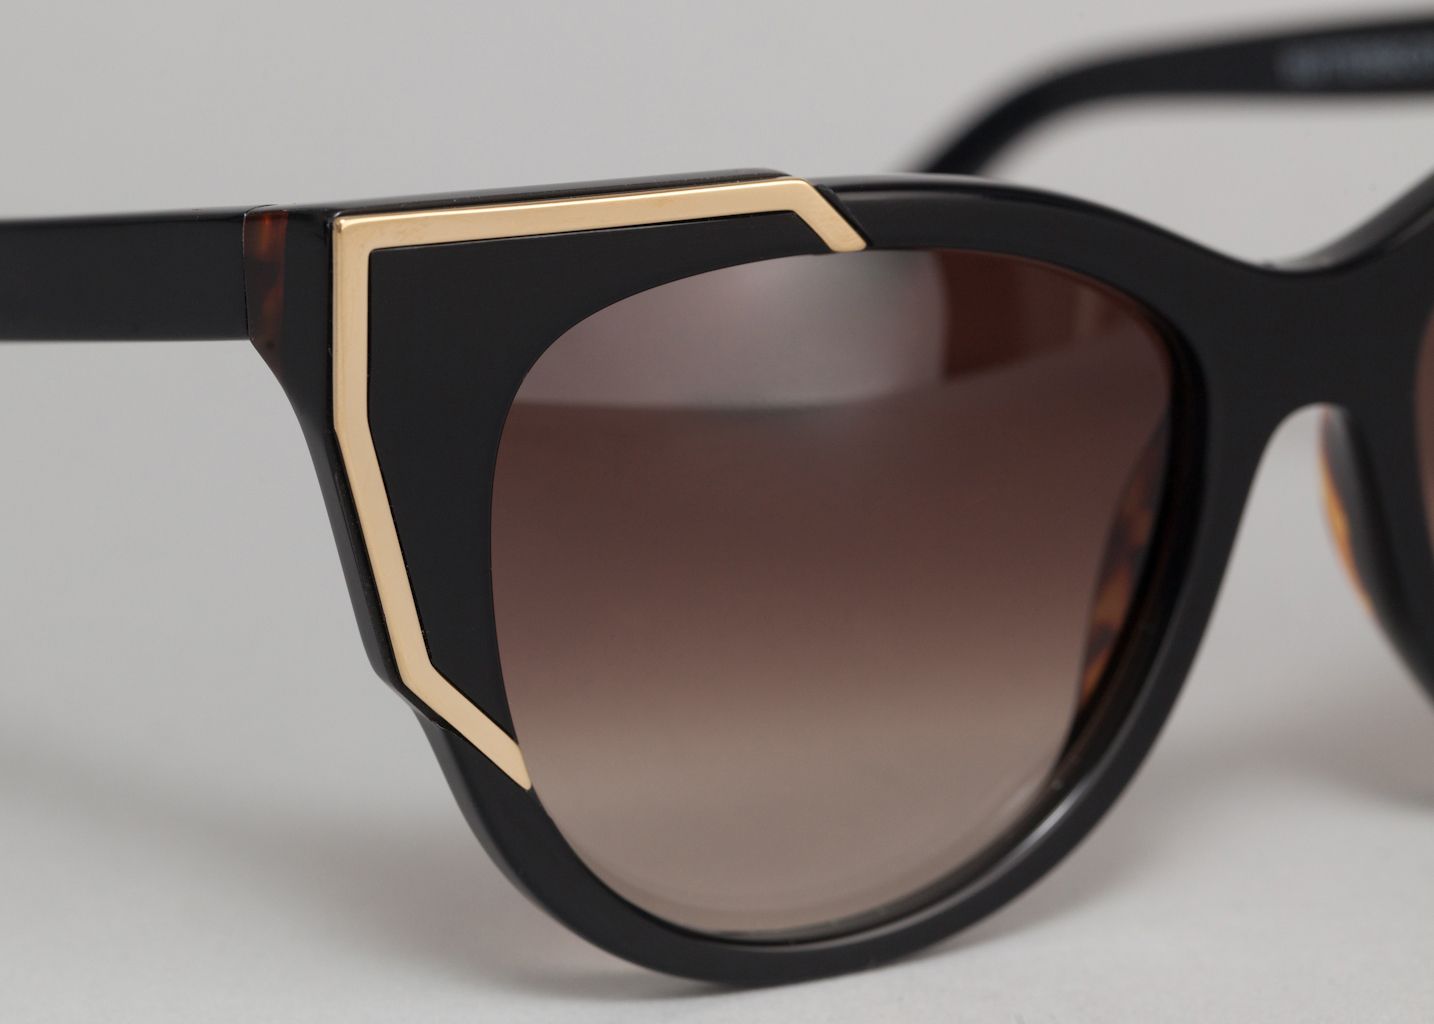 Lunettes Butterscotchy - Thierry Lasry